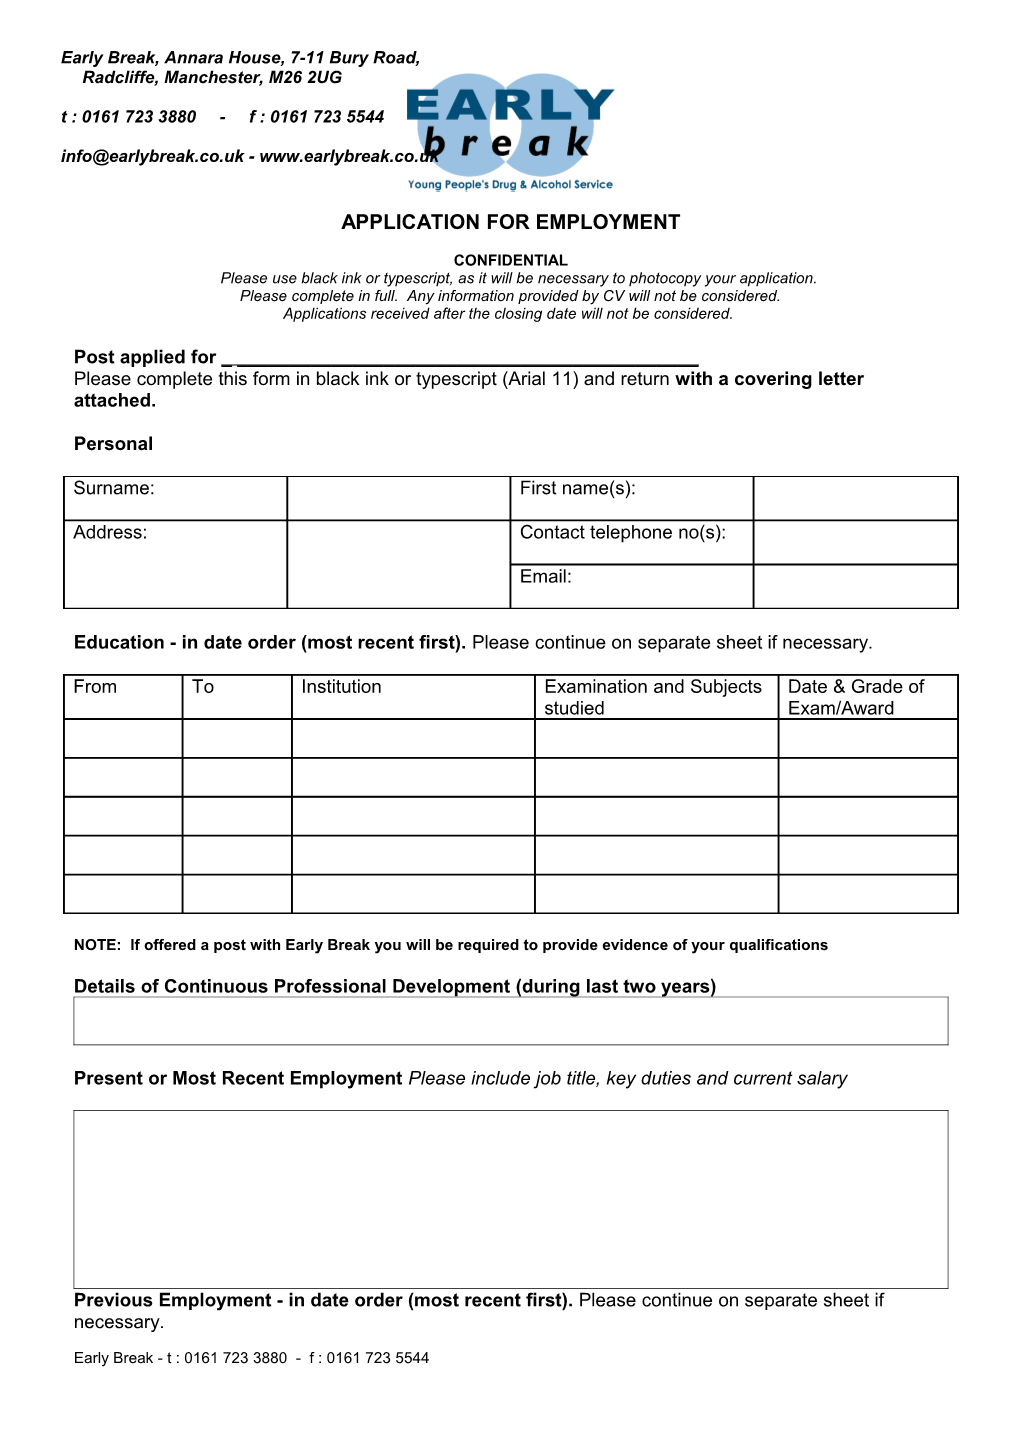 Application for Employment s56